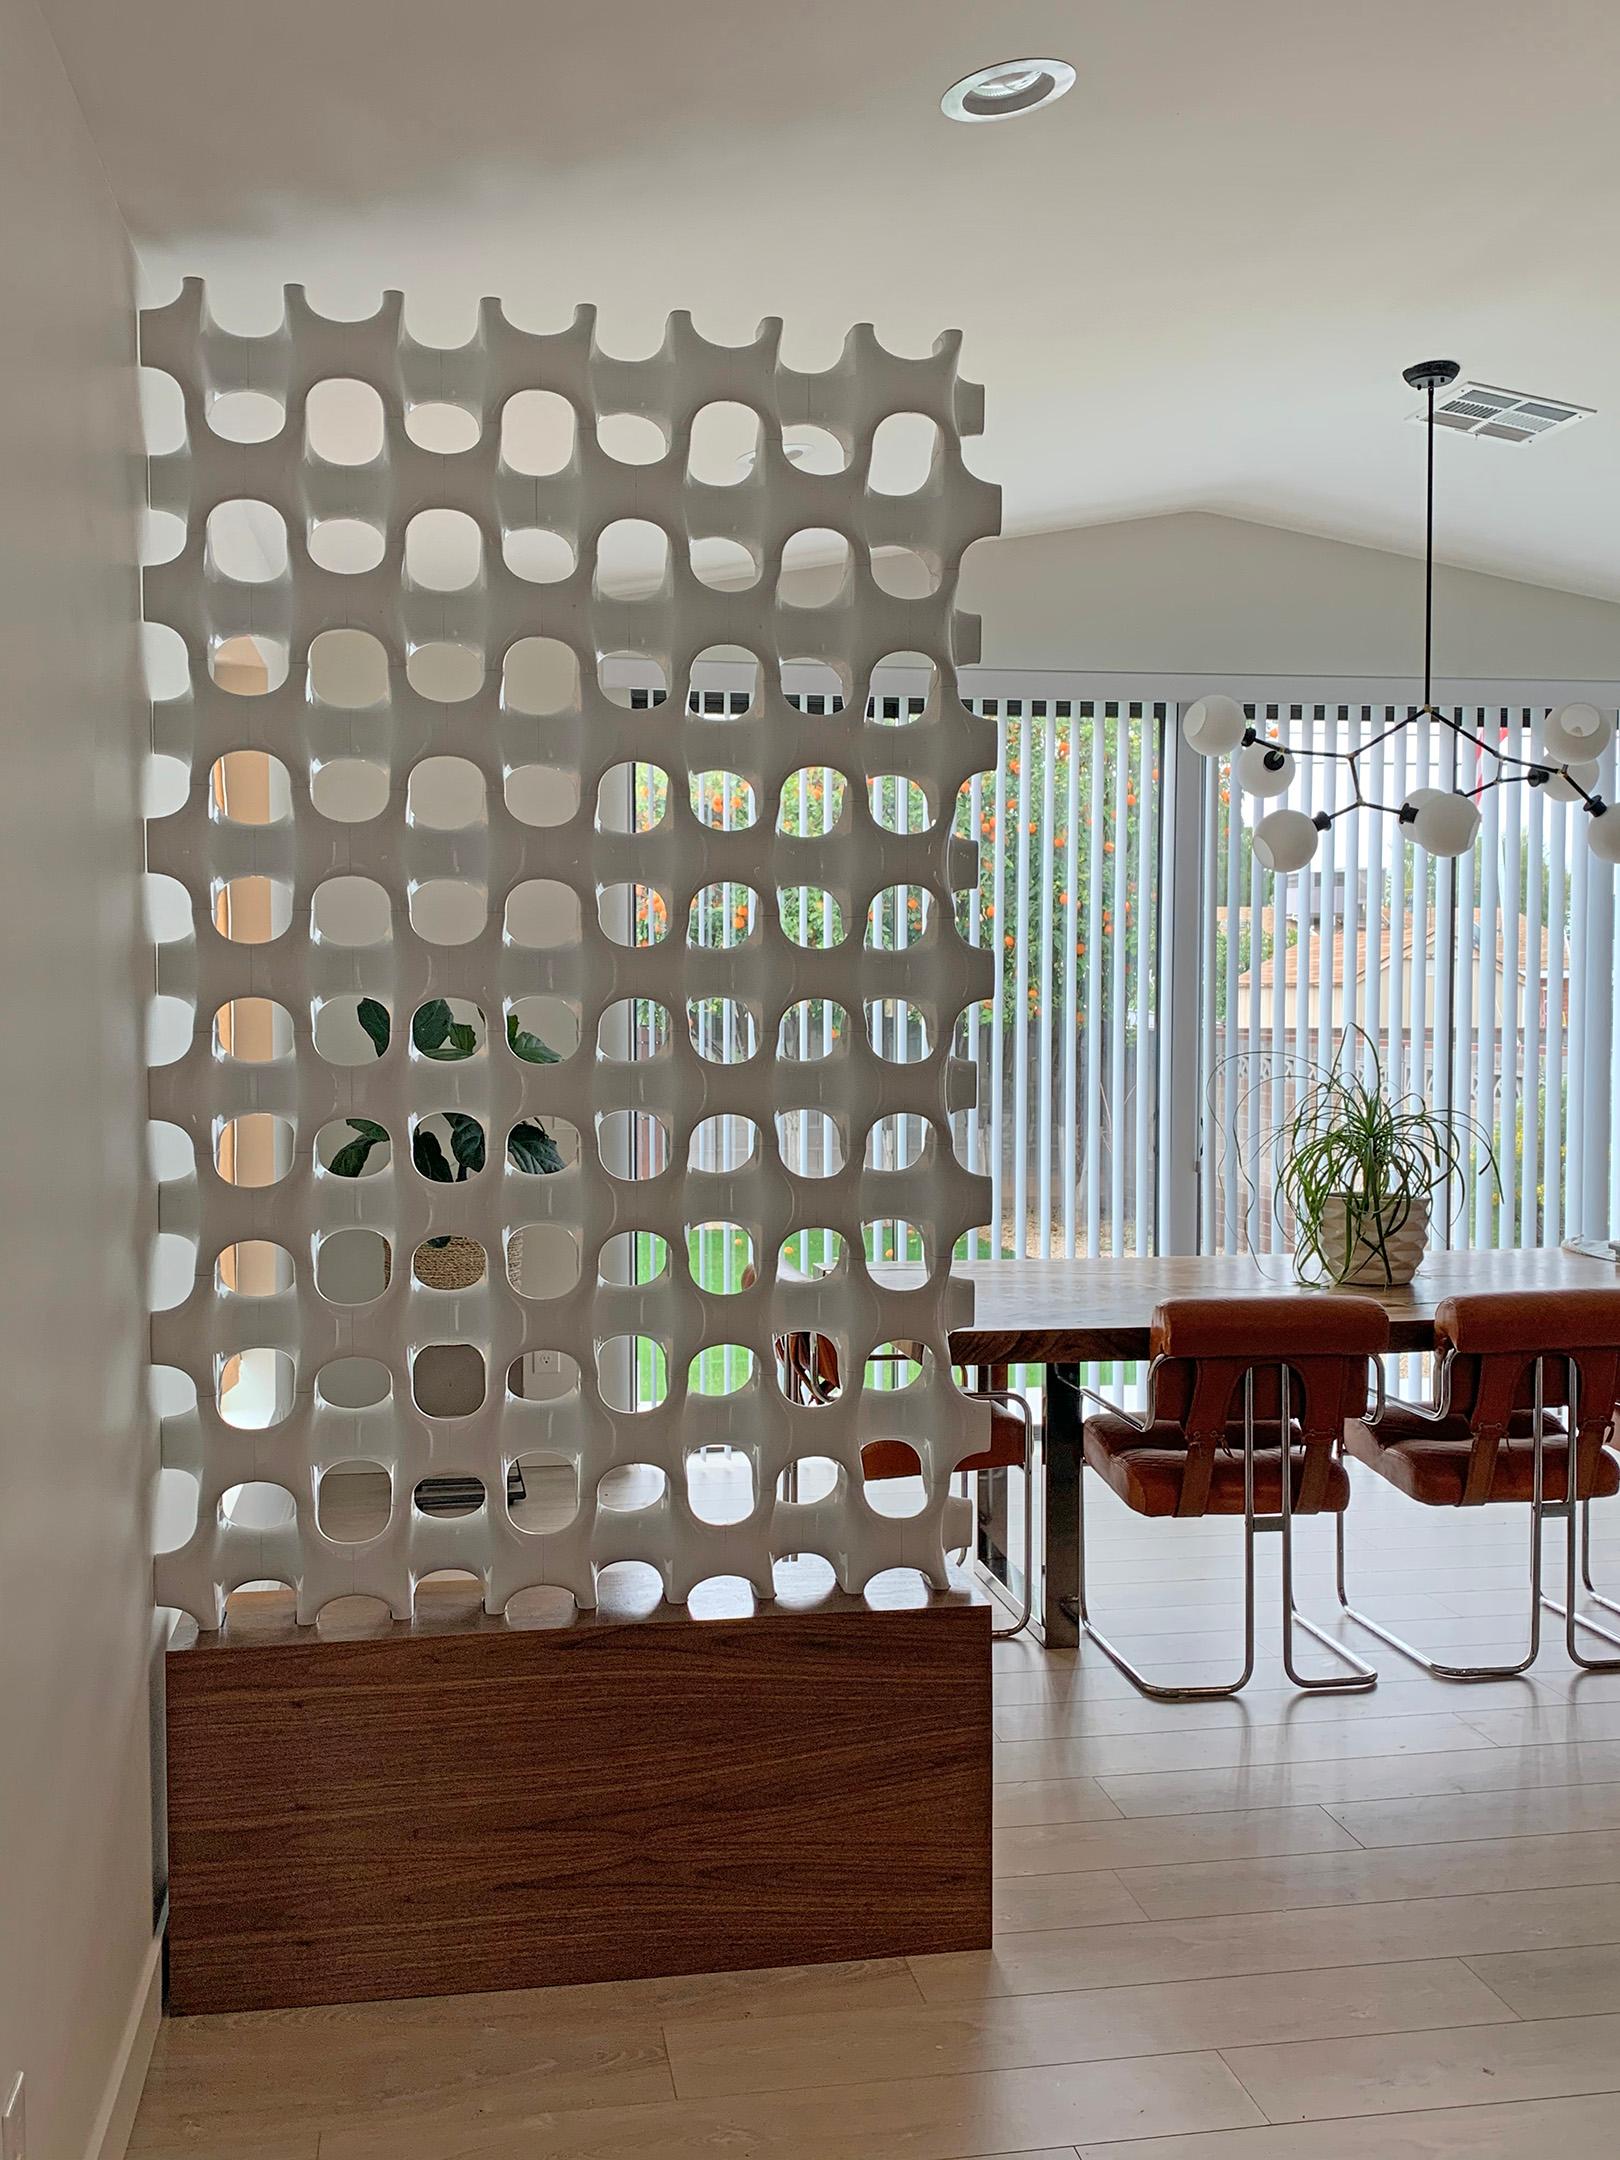 Richard Harvey's Sculpta-Grille screen is a stunning and iconic architectural feature that was designed in the 1960s as a decorative enhancement for homes, commercial spaces, hotels etc. The grille itself is made of injection molded plastic